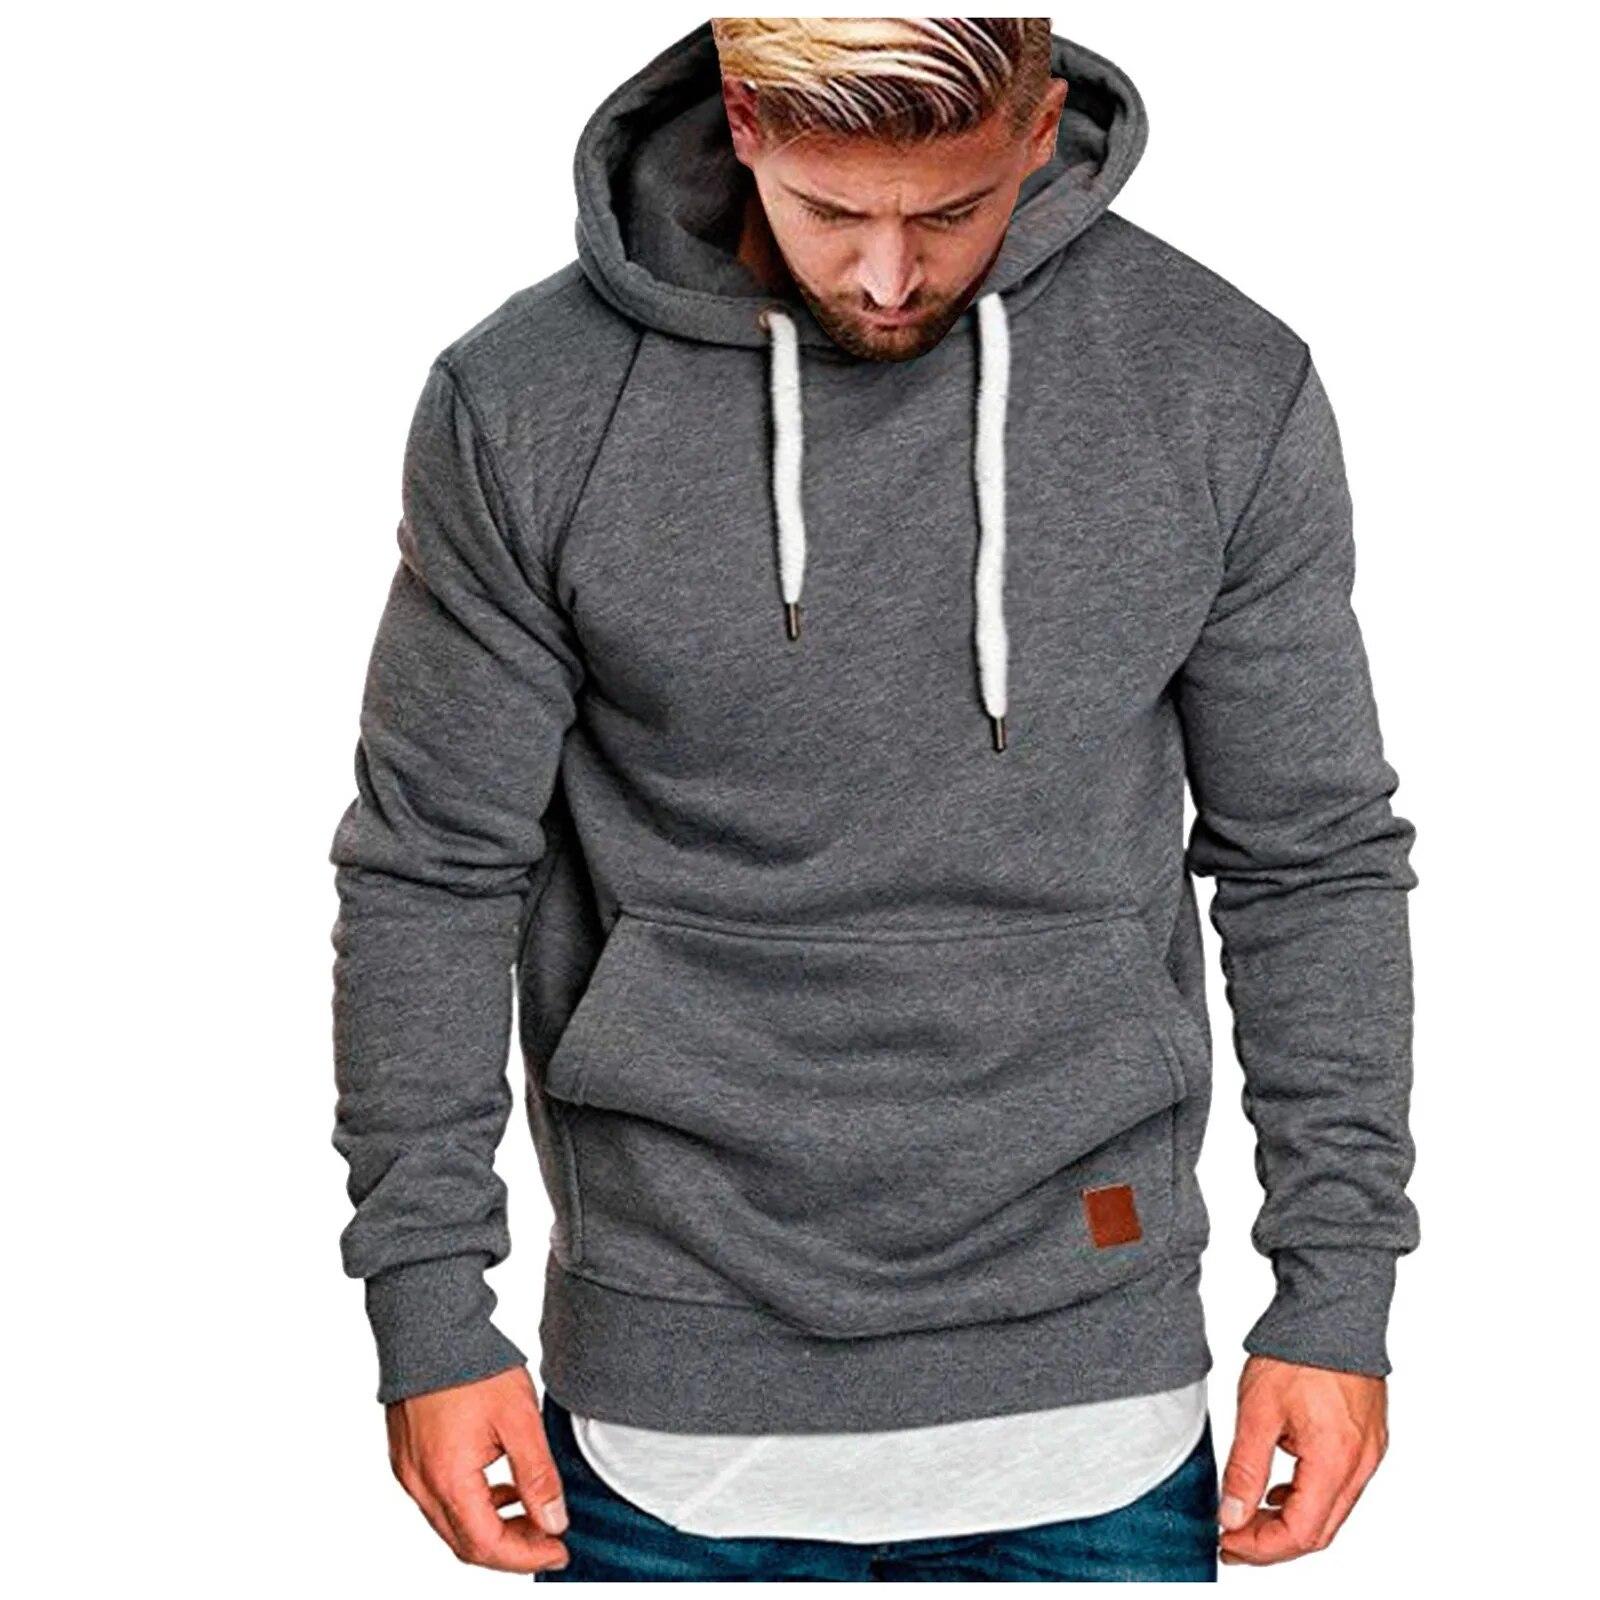 FIVE FIVE Mens Casual Hoodie Large Size Sweatershirts Drawstring Soild Long Sleeveless Hoodies for Man Outdoor Sport Hooded Sweatershirt